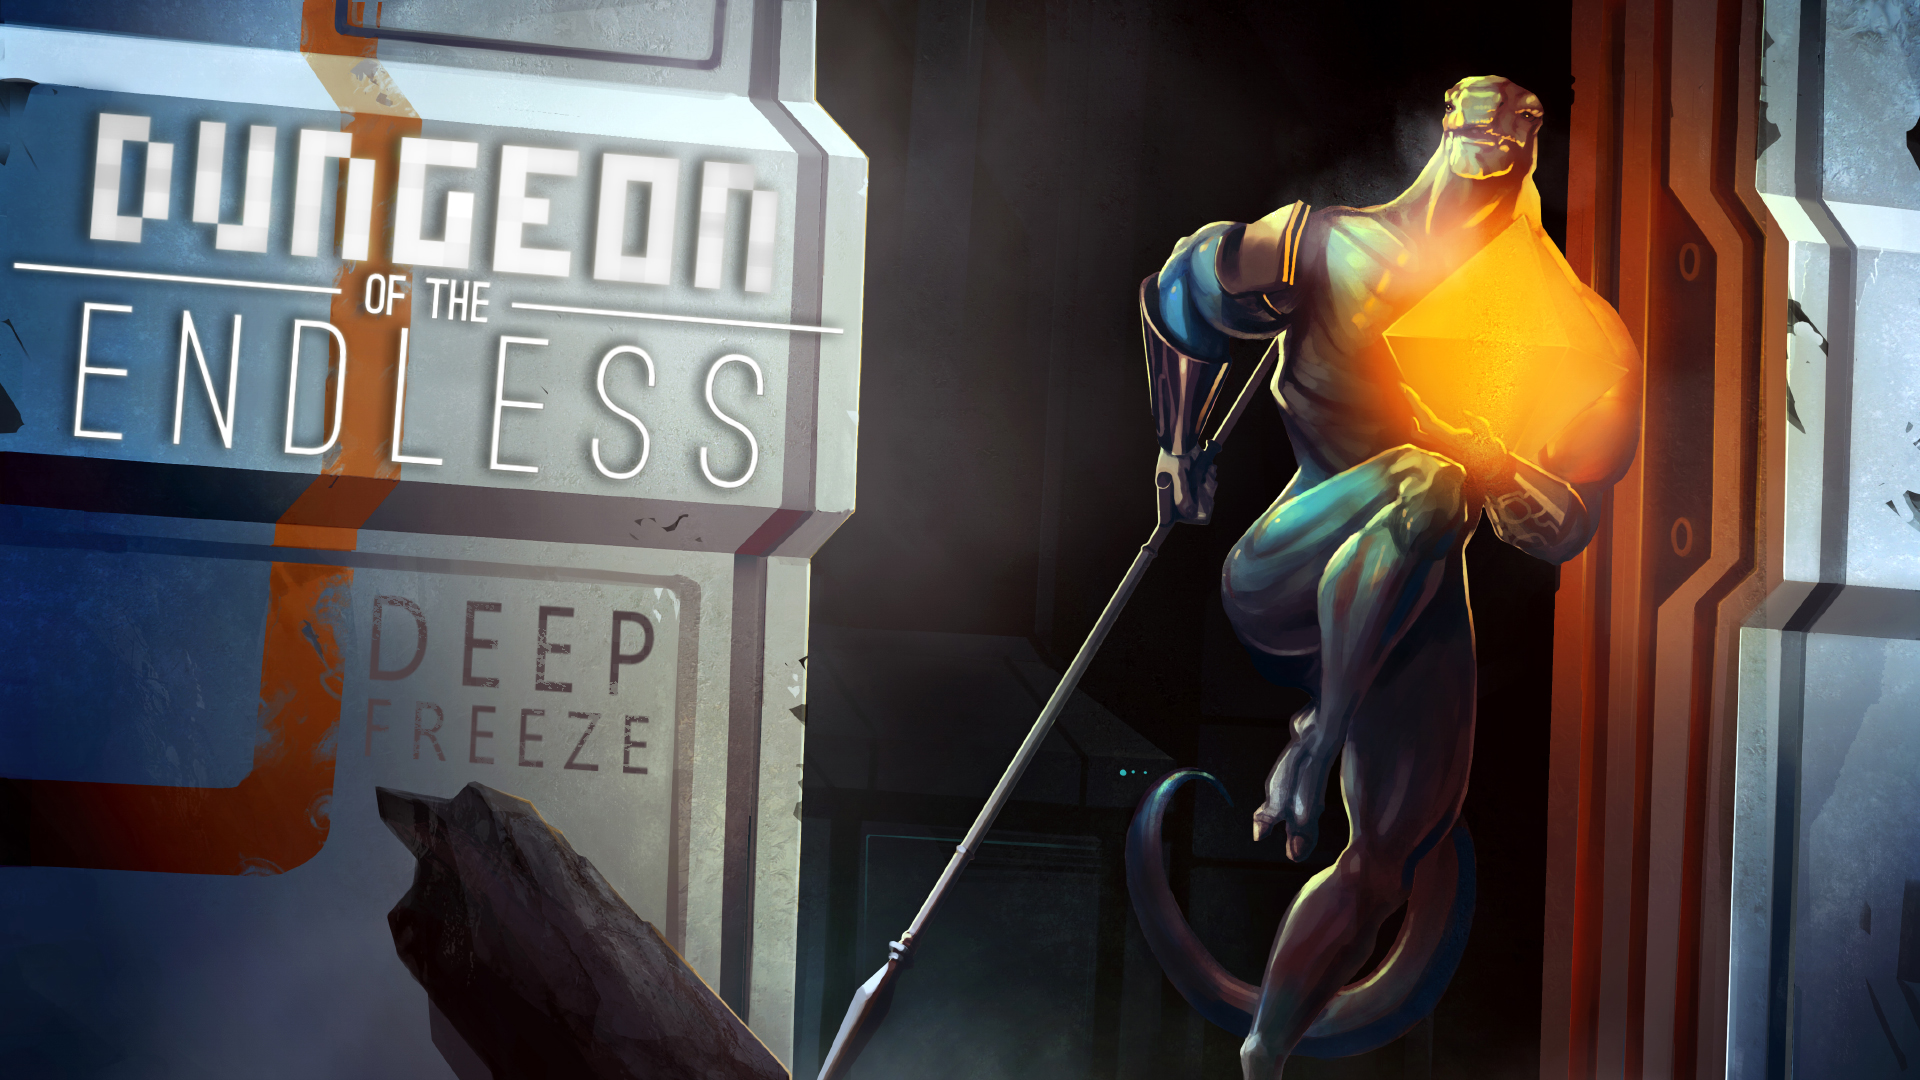 Dungeon of the ENDLESS™ - Deep Freeze Add-on Featured Screenshot #1